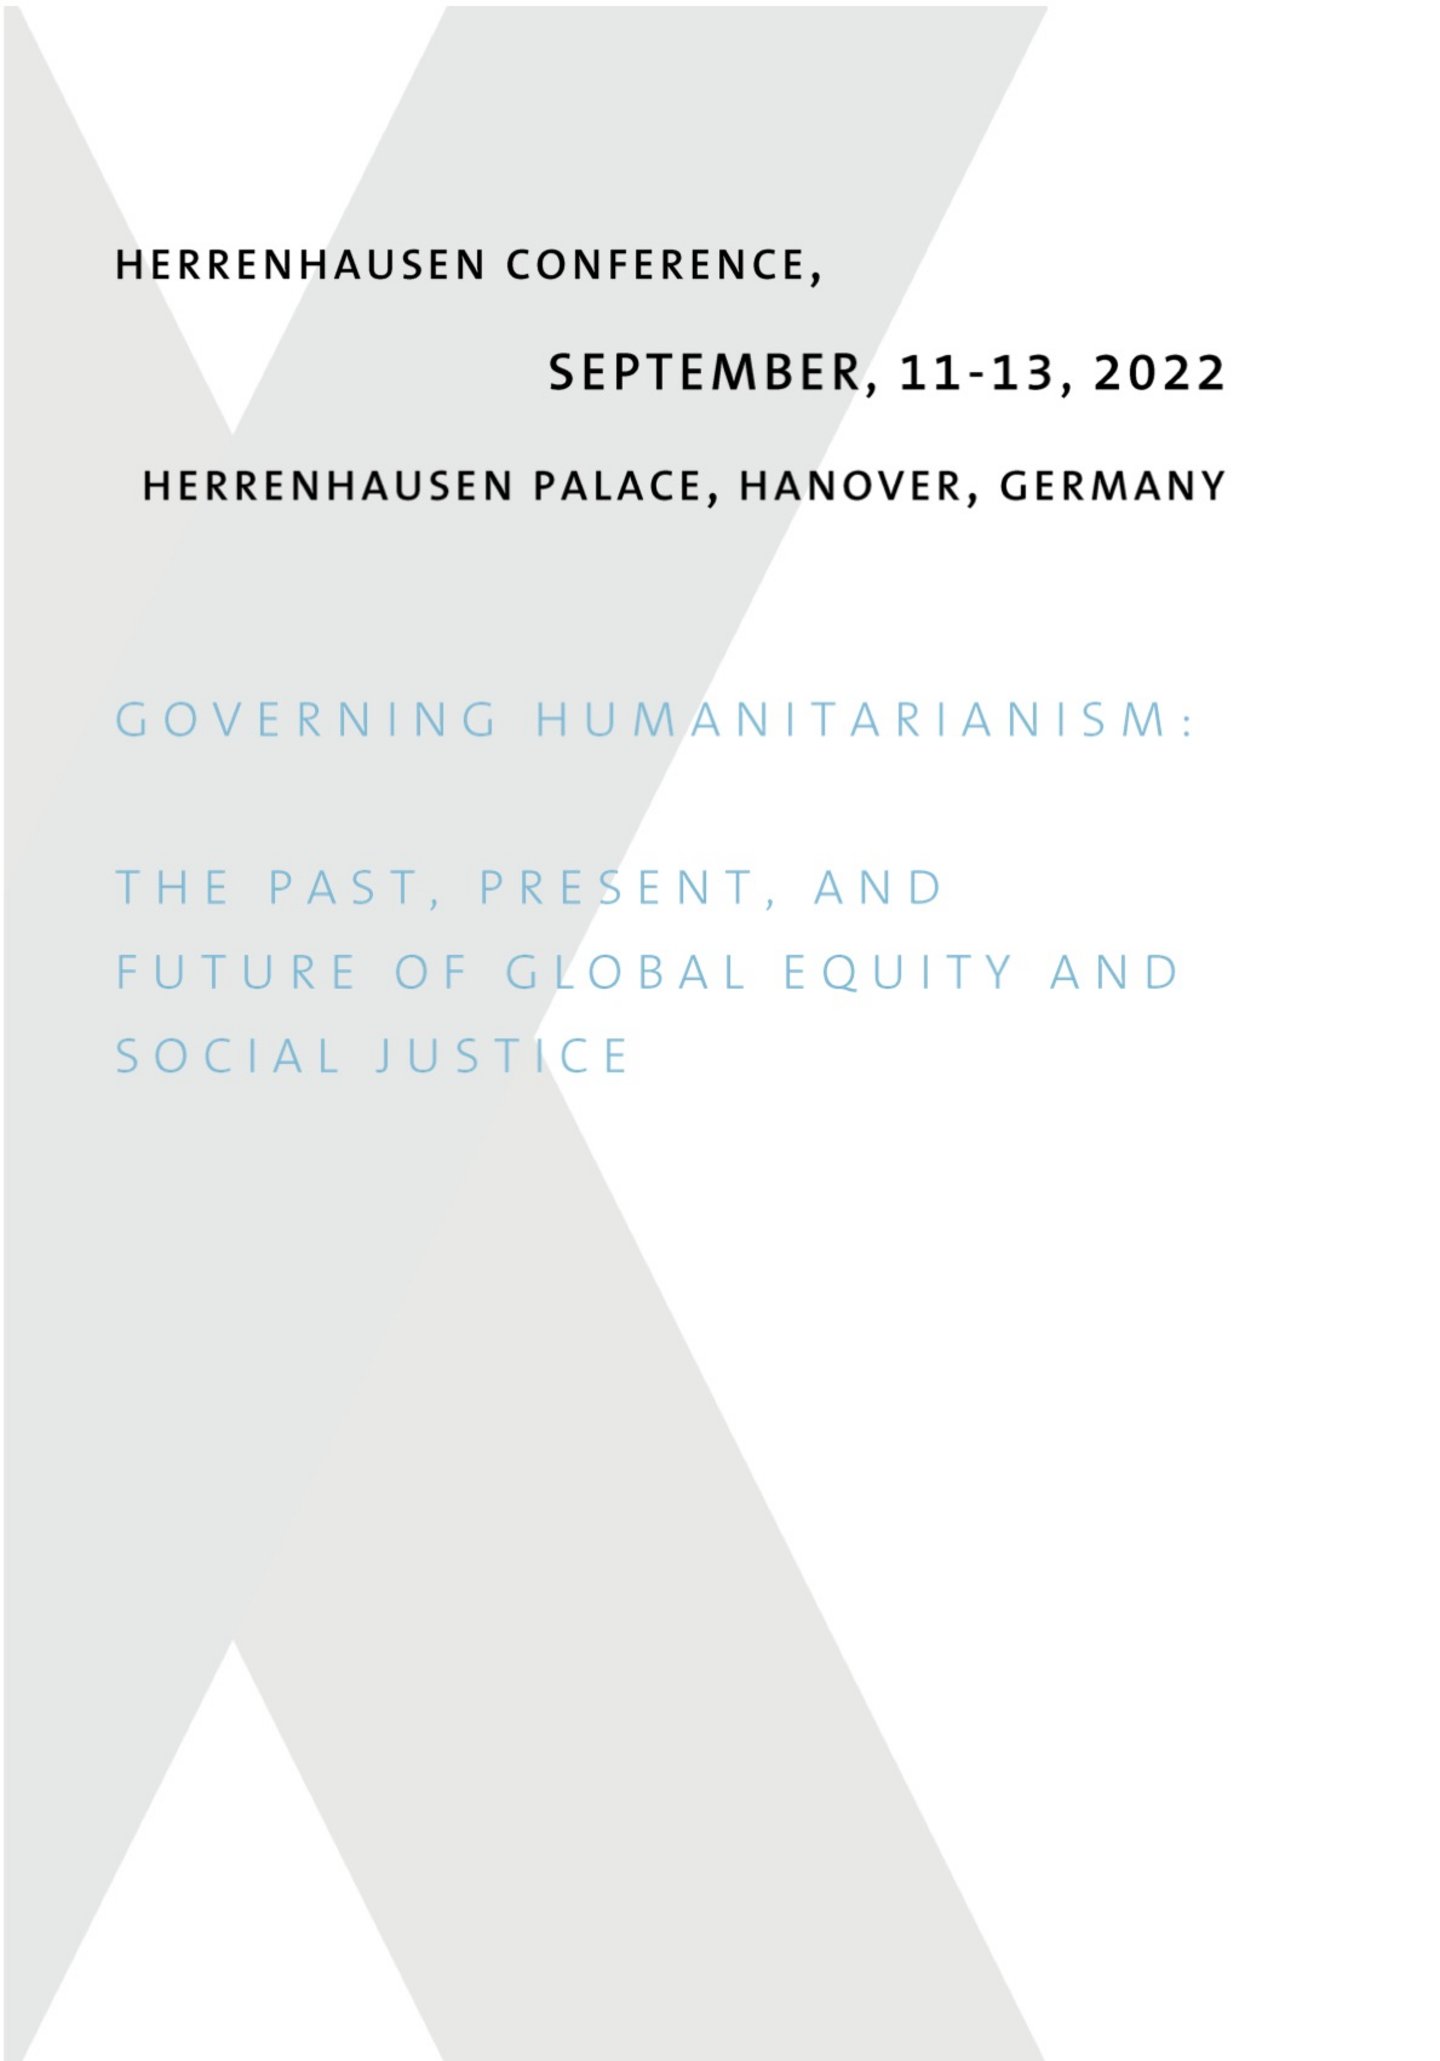 "Governing Humanitarianism - Past, Present, and Future of Global Equity and Social Justice" 